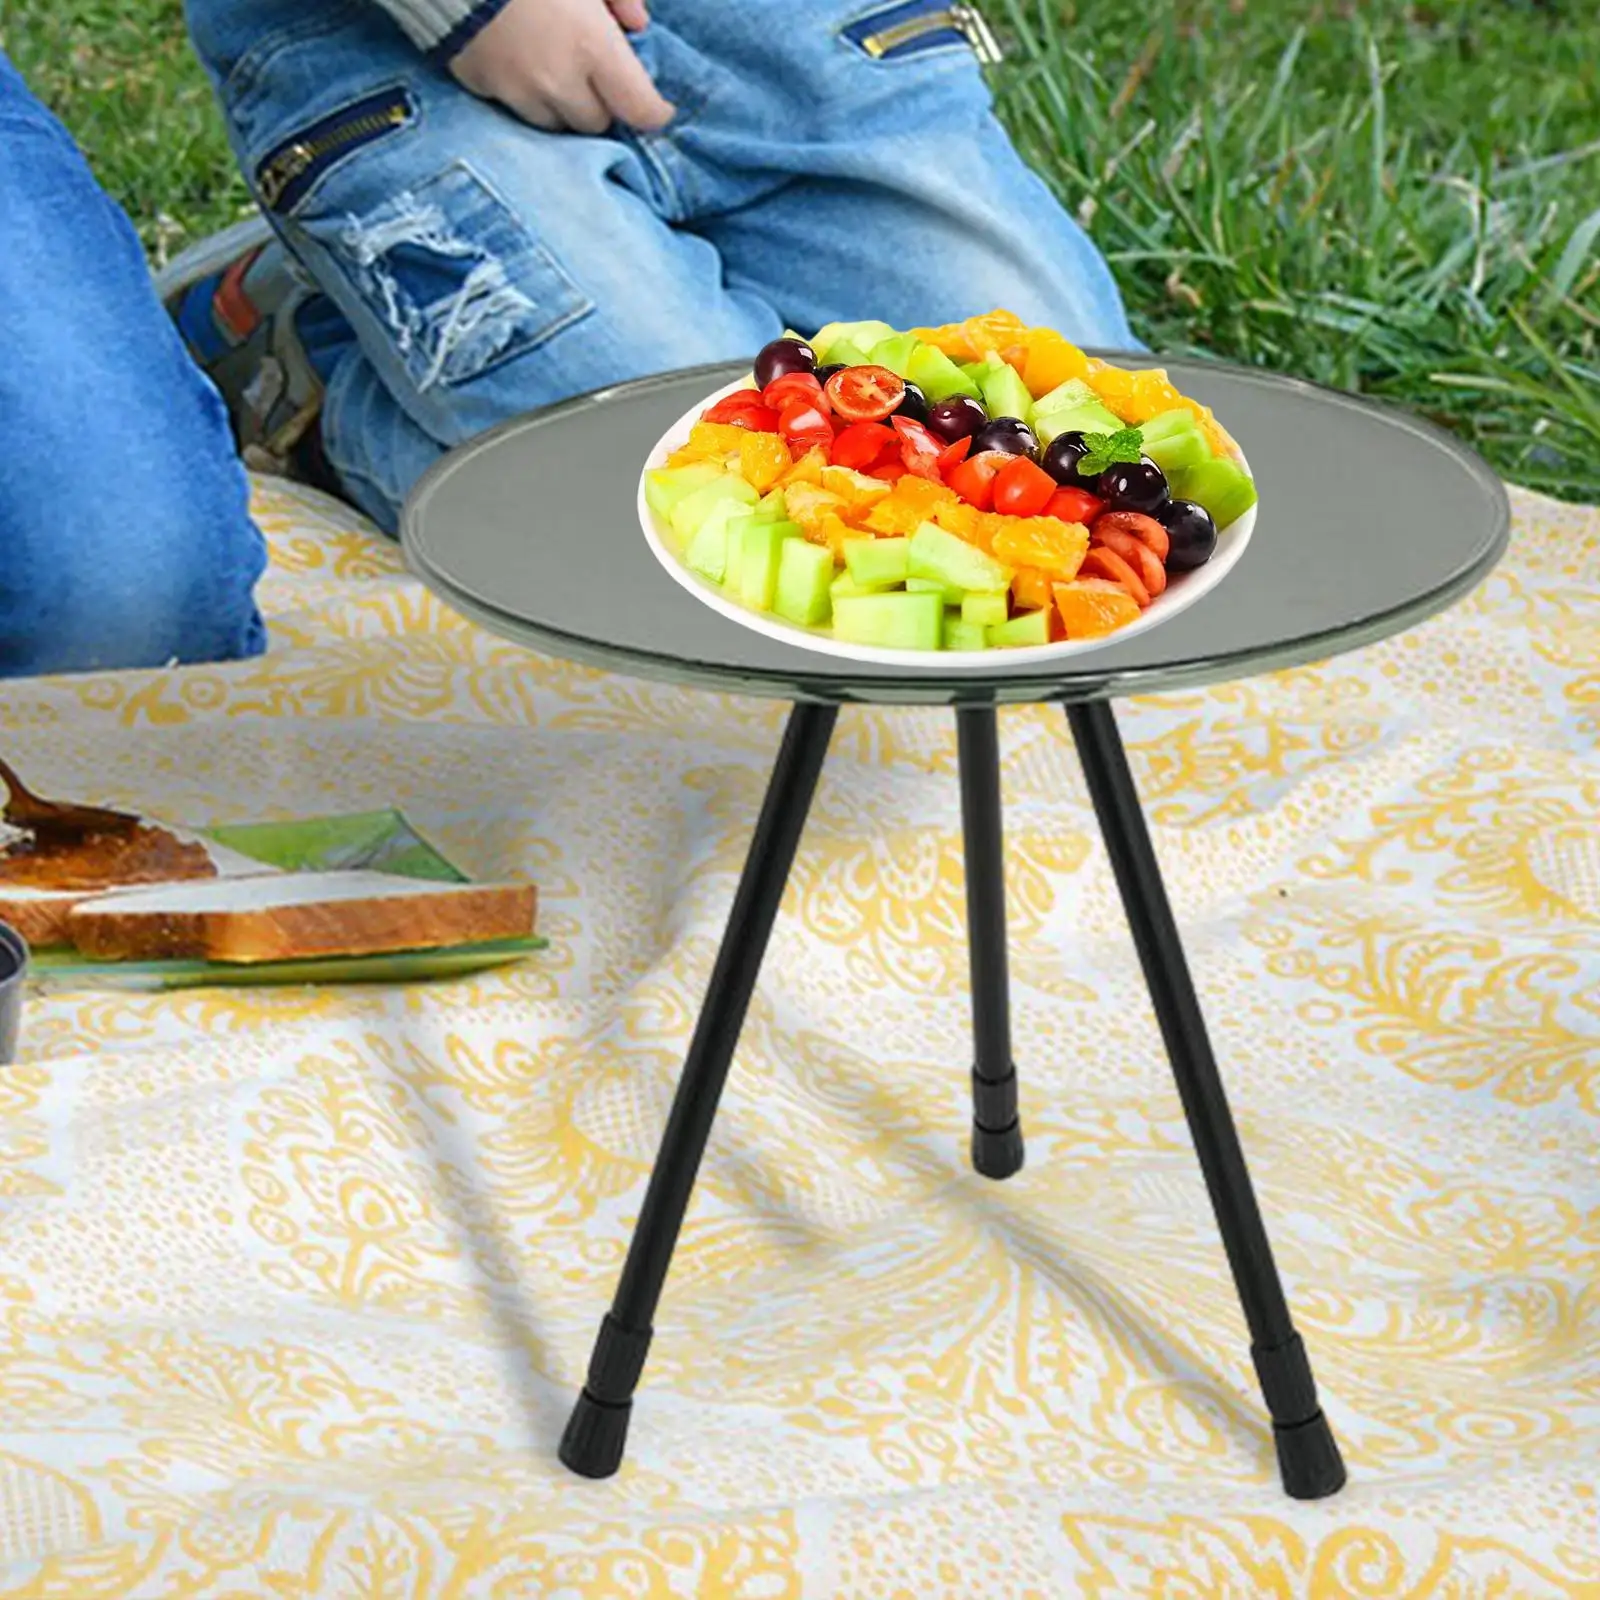 Retractable Round Table Foldable Height Adjustable Furniture Multifunctional Stable Lifting Desk for Fishing Beach Barbecue